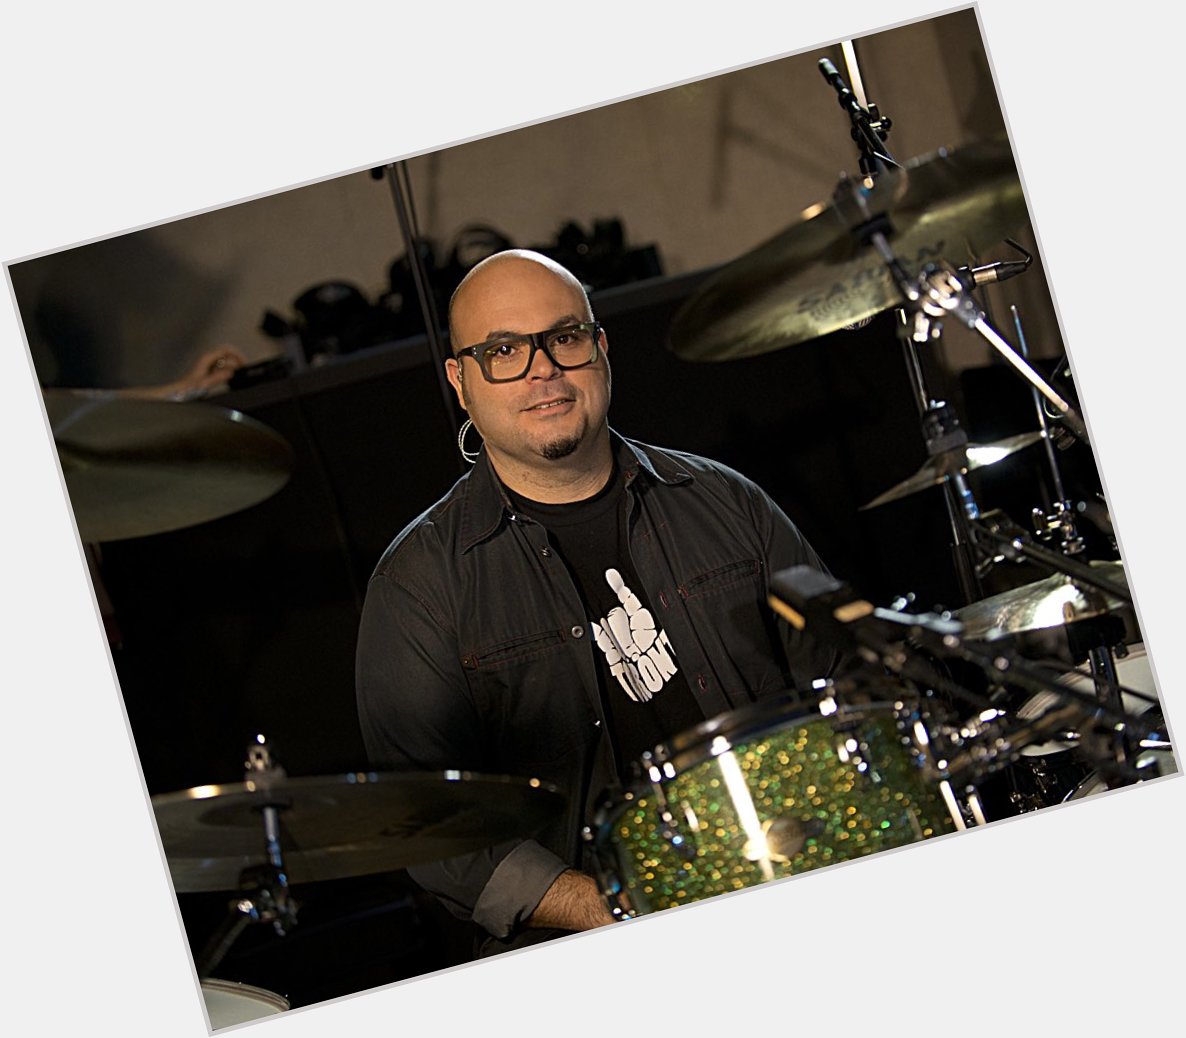 Happy 53rd Birthday to Tyler Stewart! The drummer for the Canadian music group Barenaked Ladies. 